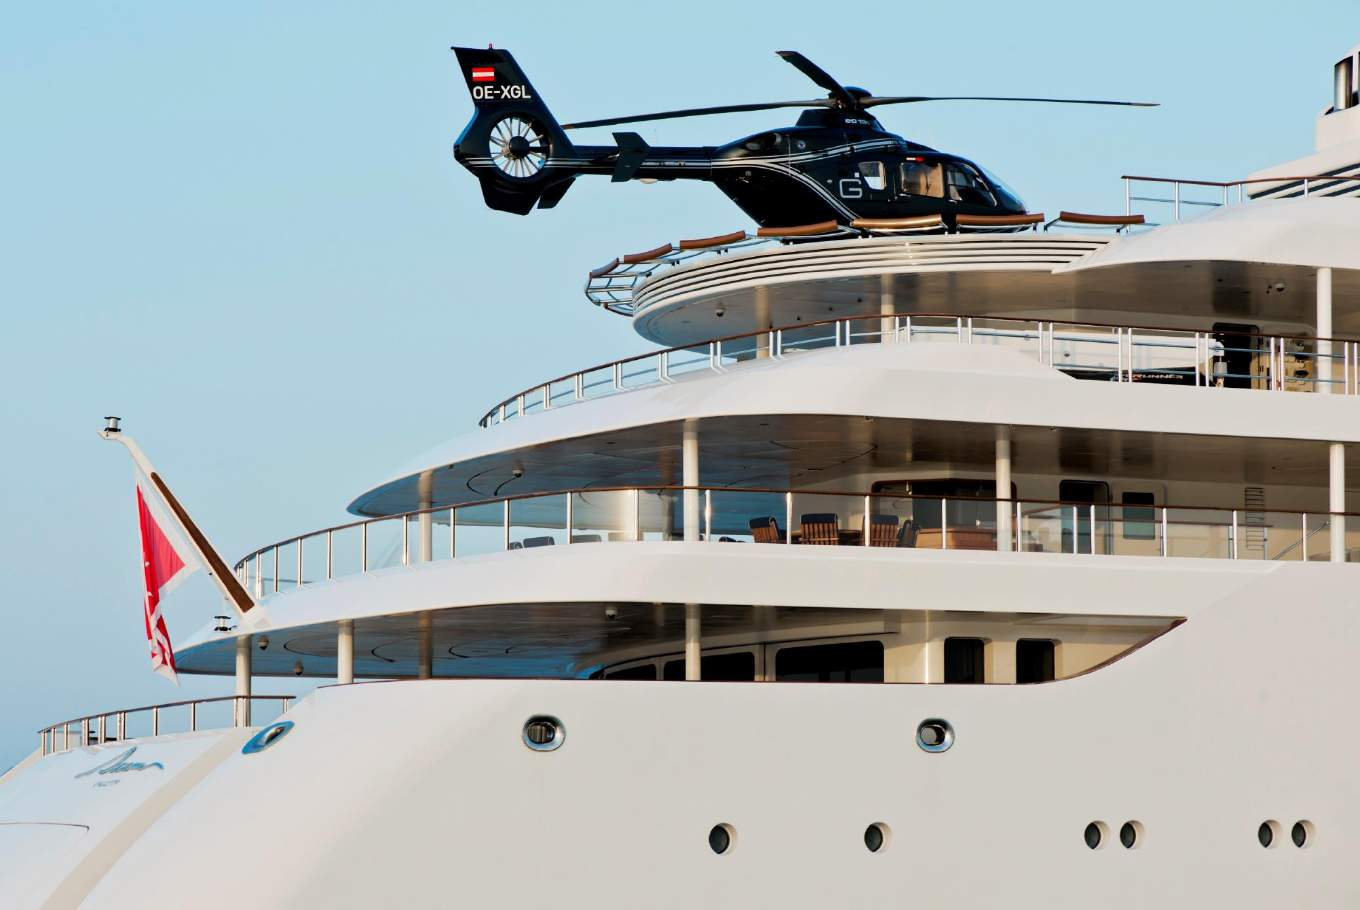 yacht de luxe helicopter